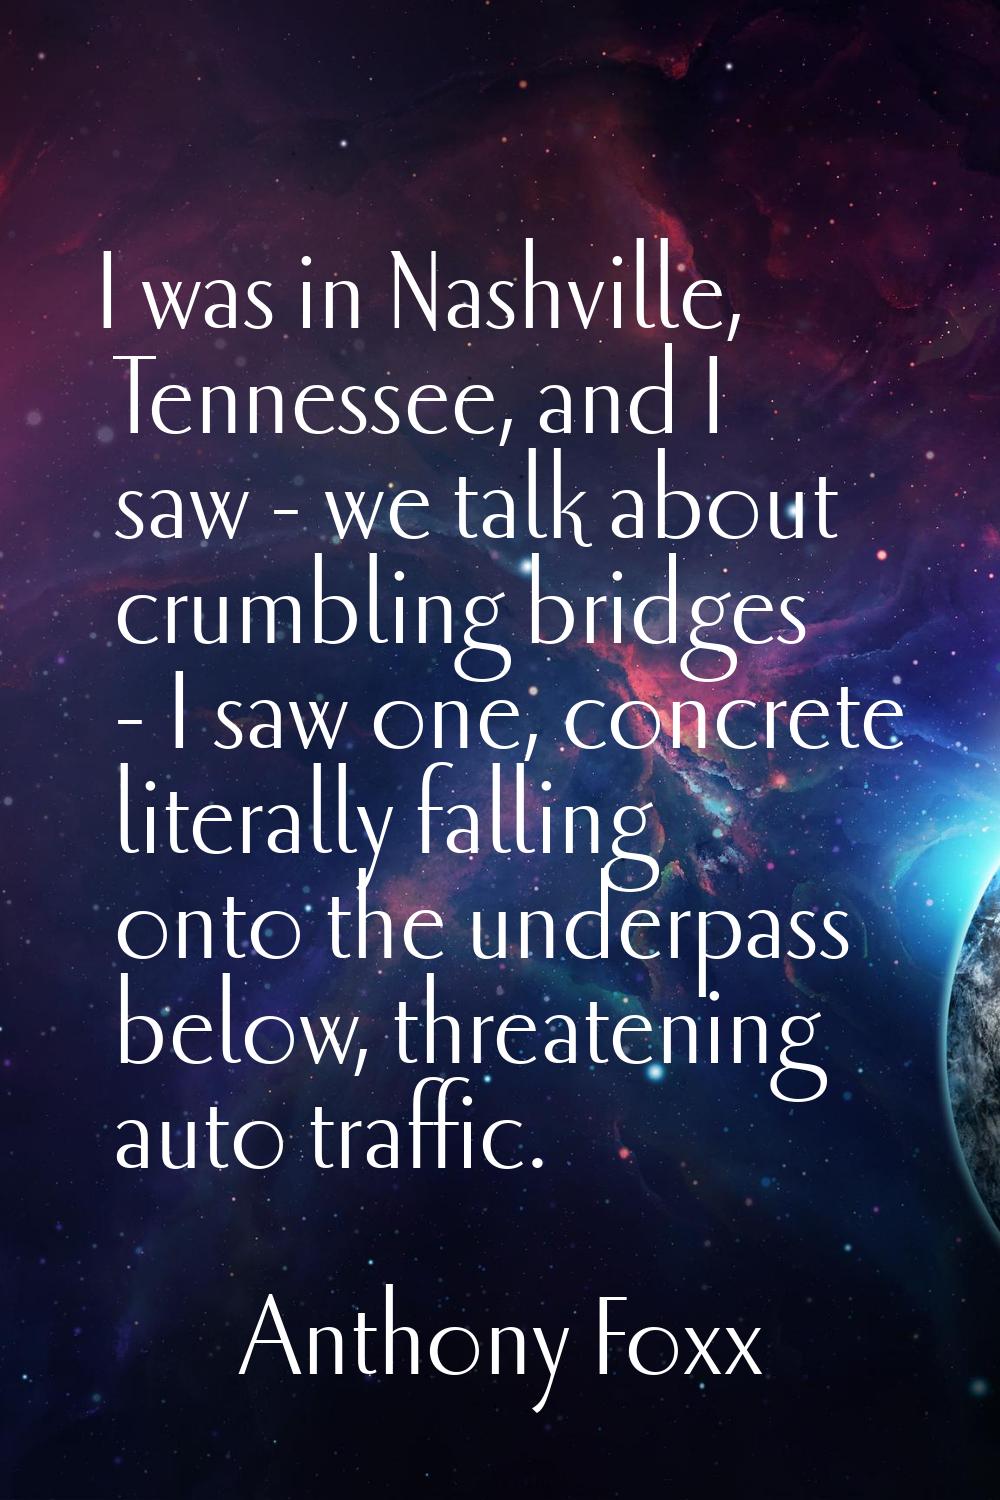 I was in Nashville, Tennessee, and I saw - we talk about crumbling bridges - I saw one, concrete li